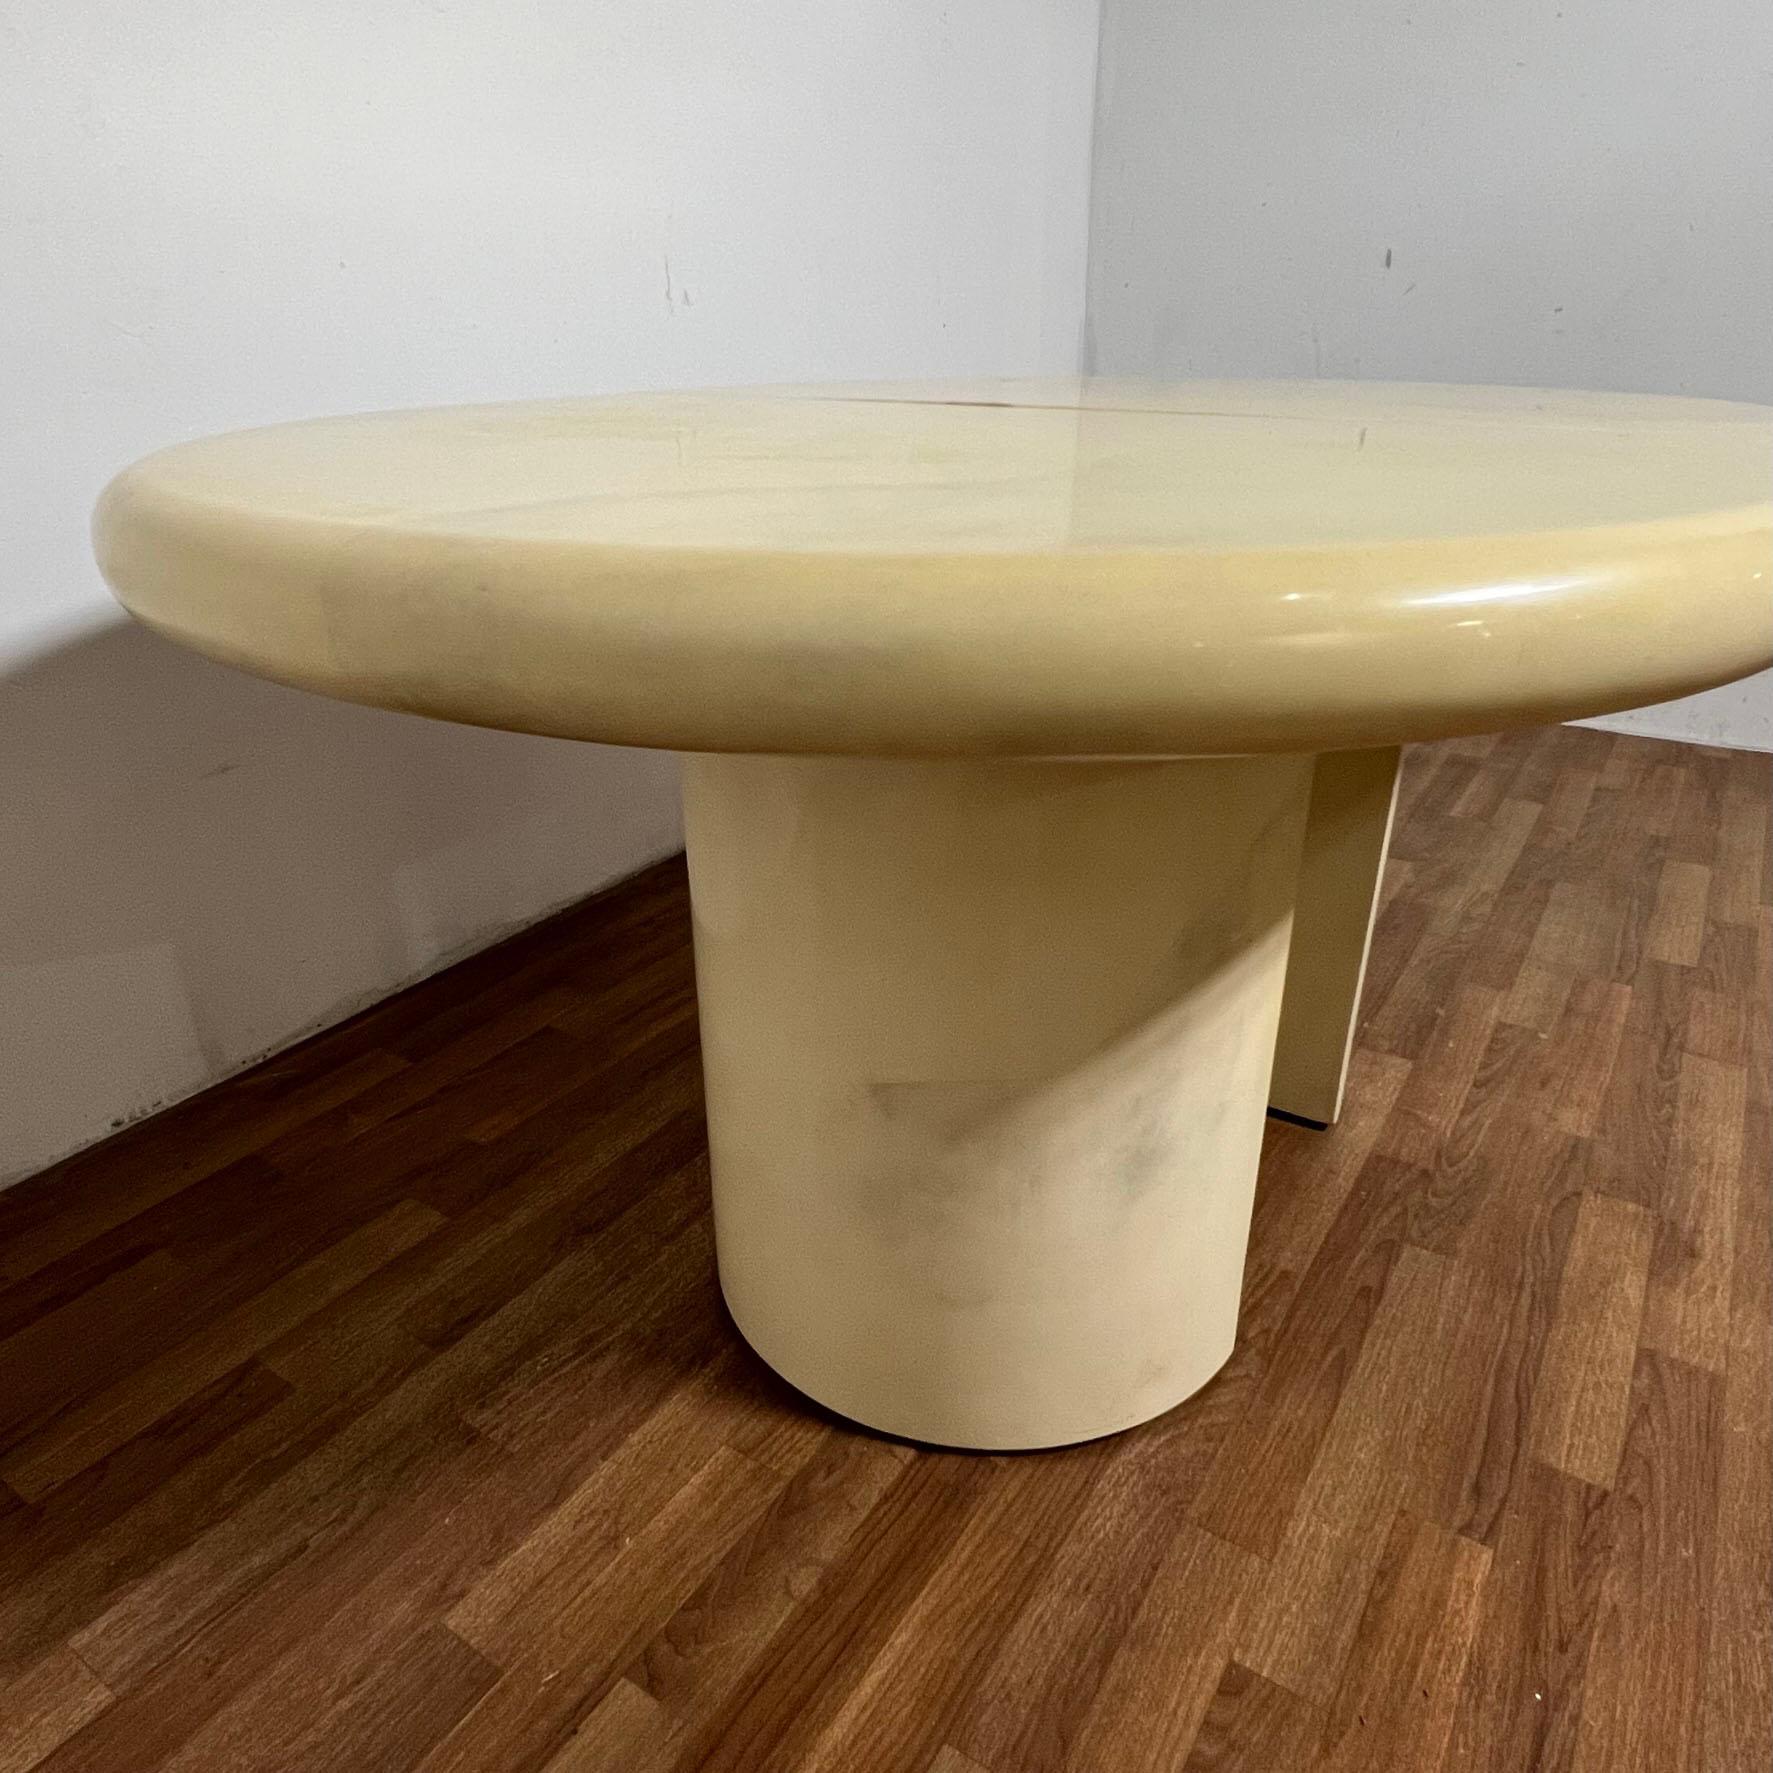 Faux Goat Skin Lacquered Dining Table With Two Leaves, Circa 1980s For Sale 7